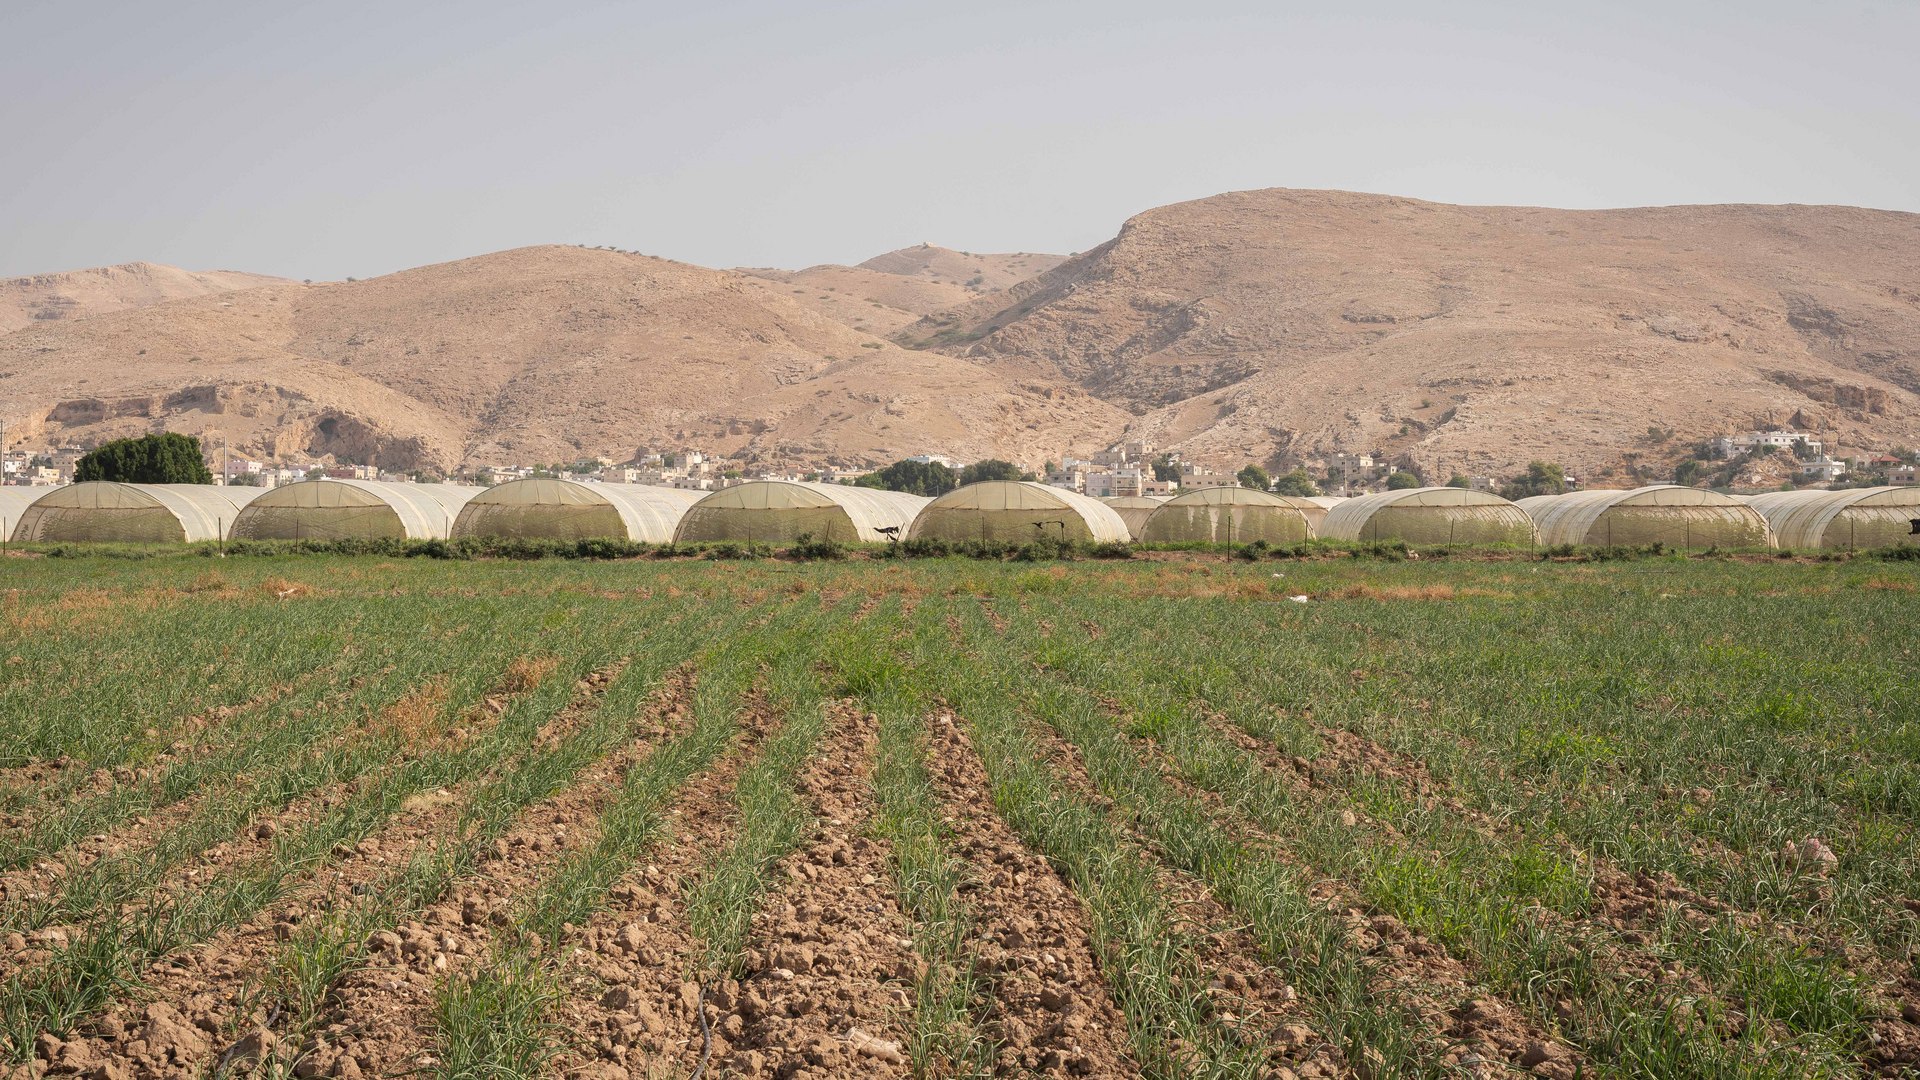 A scenic fiew on a field in Jordan Valley. There are greenhouses and mountains in the horizon.